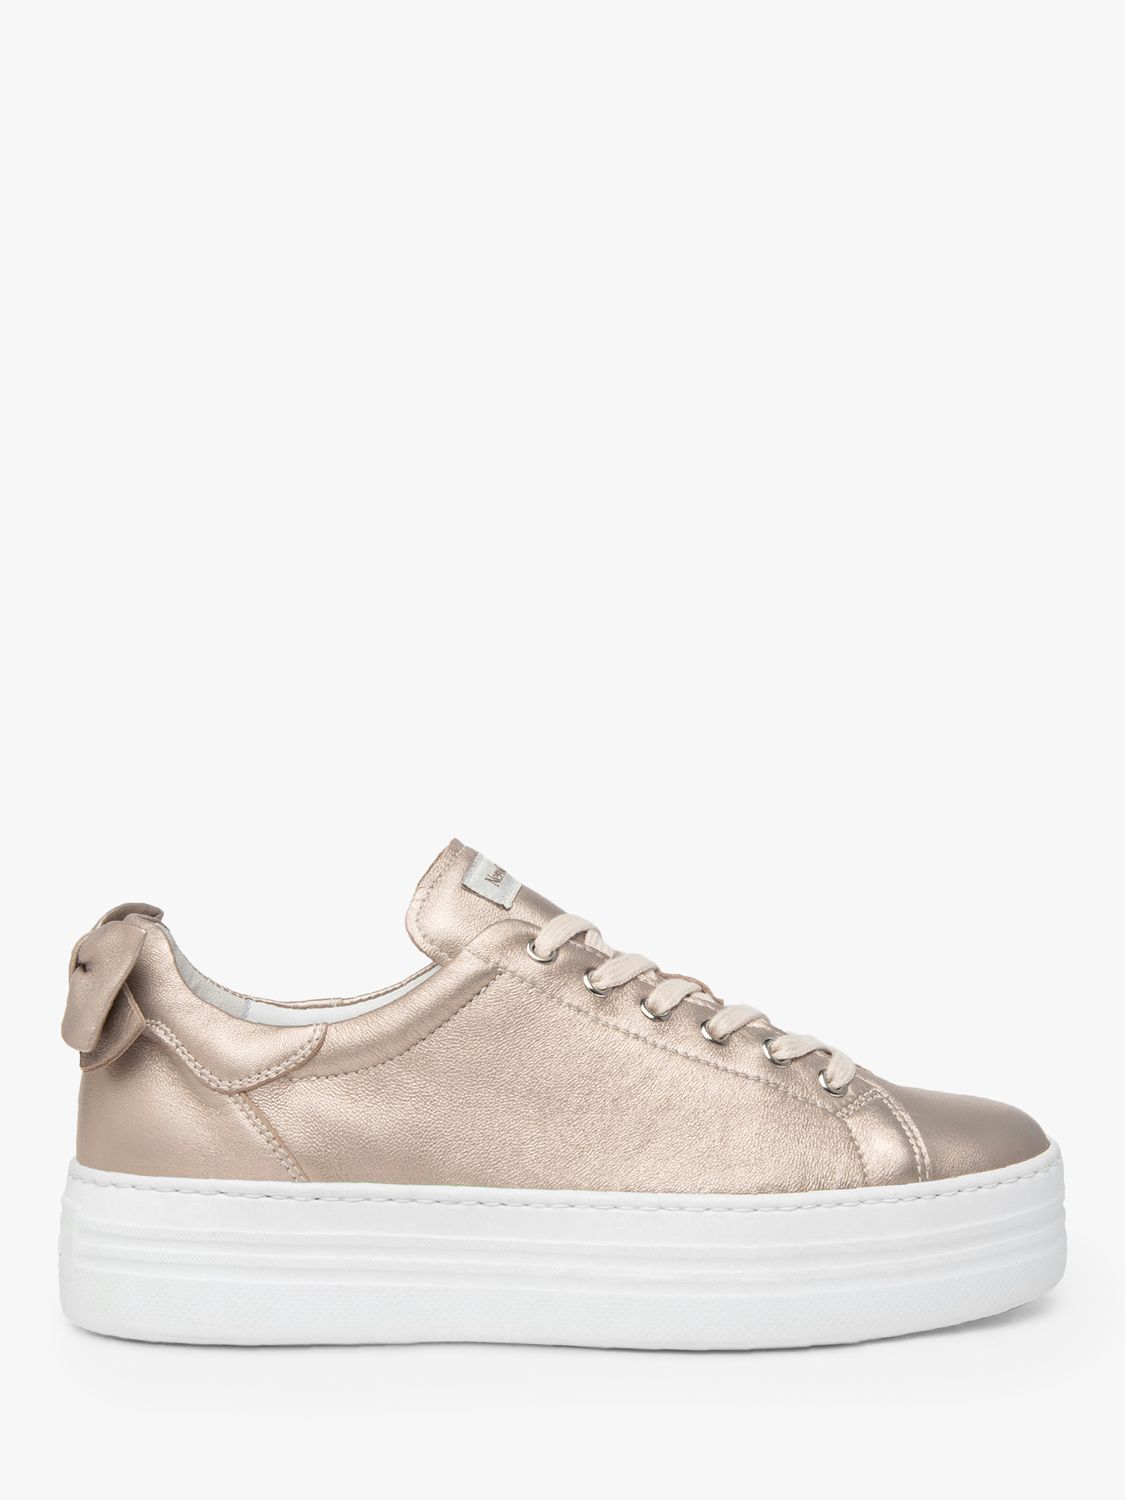 NeroGiardini Bow Leather Trainers, Gold at John Lewis & Partners